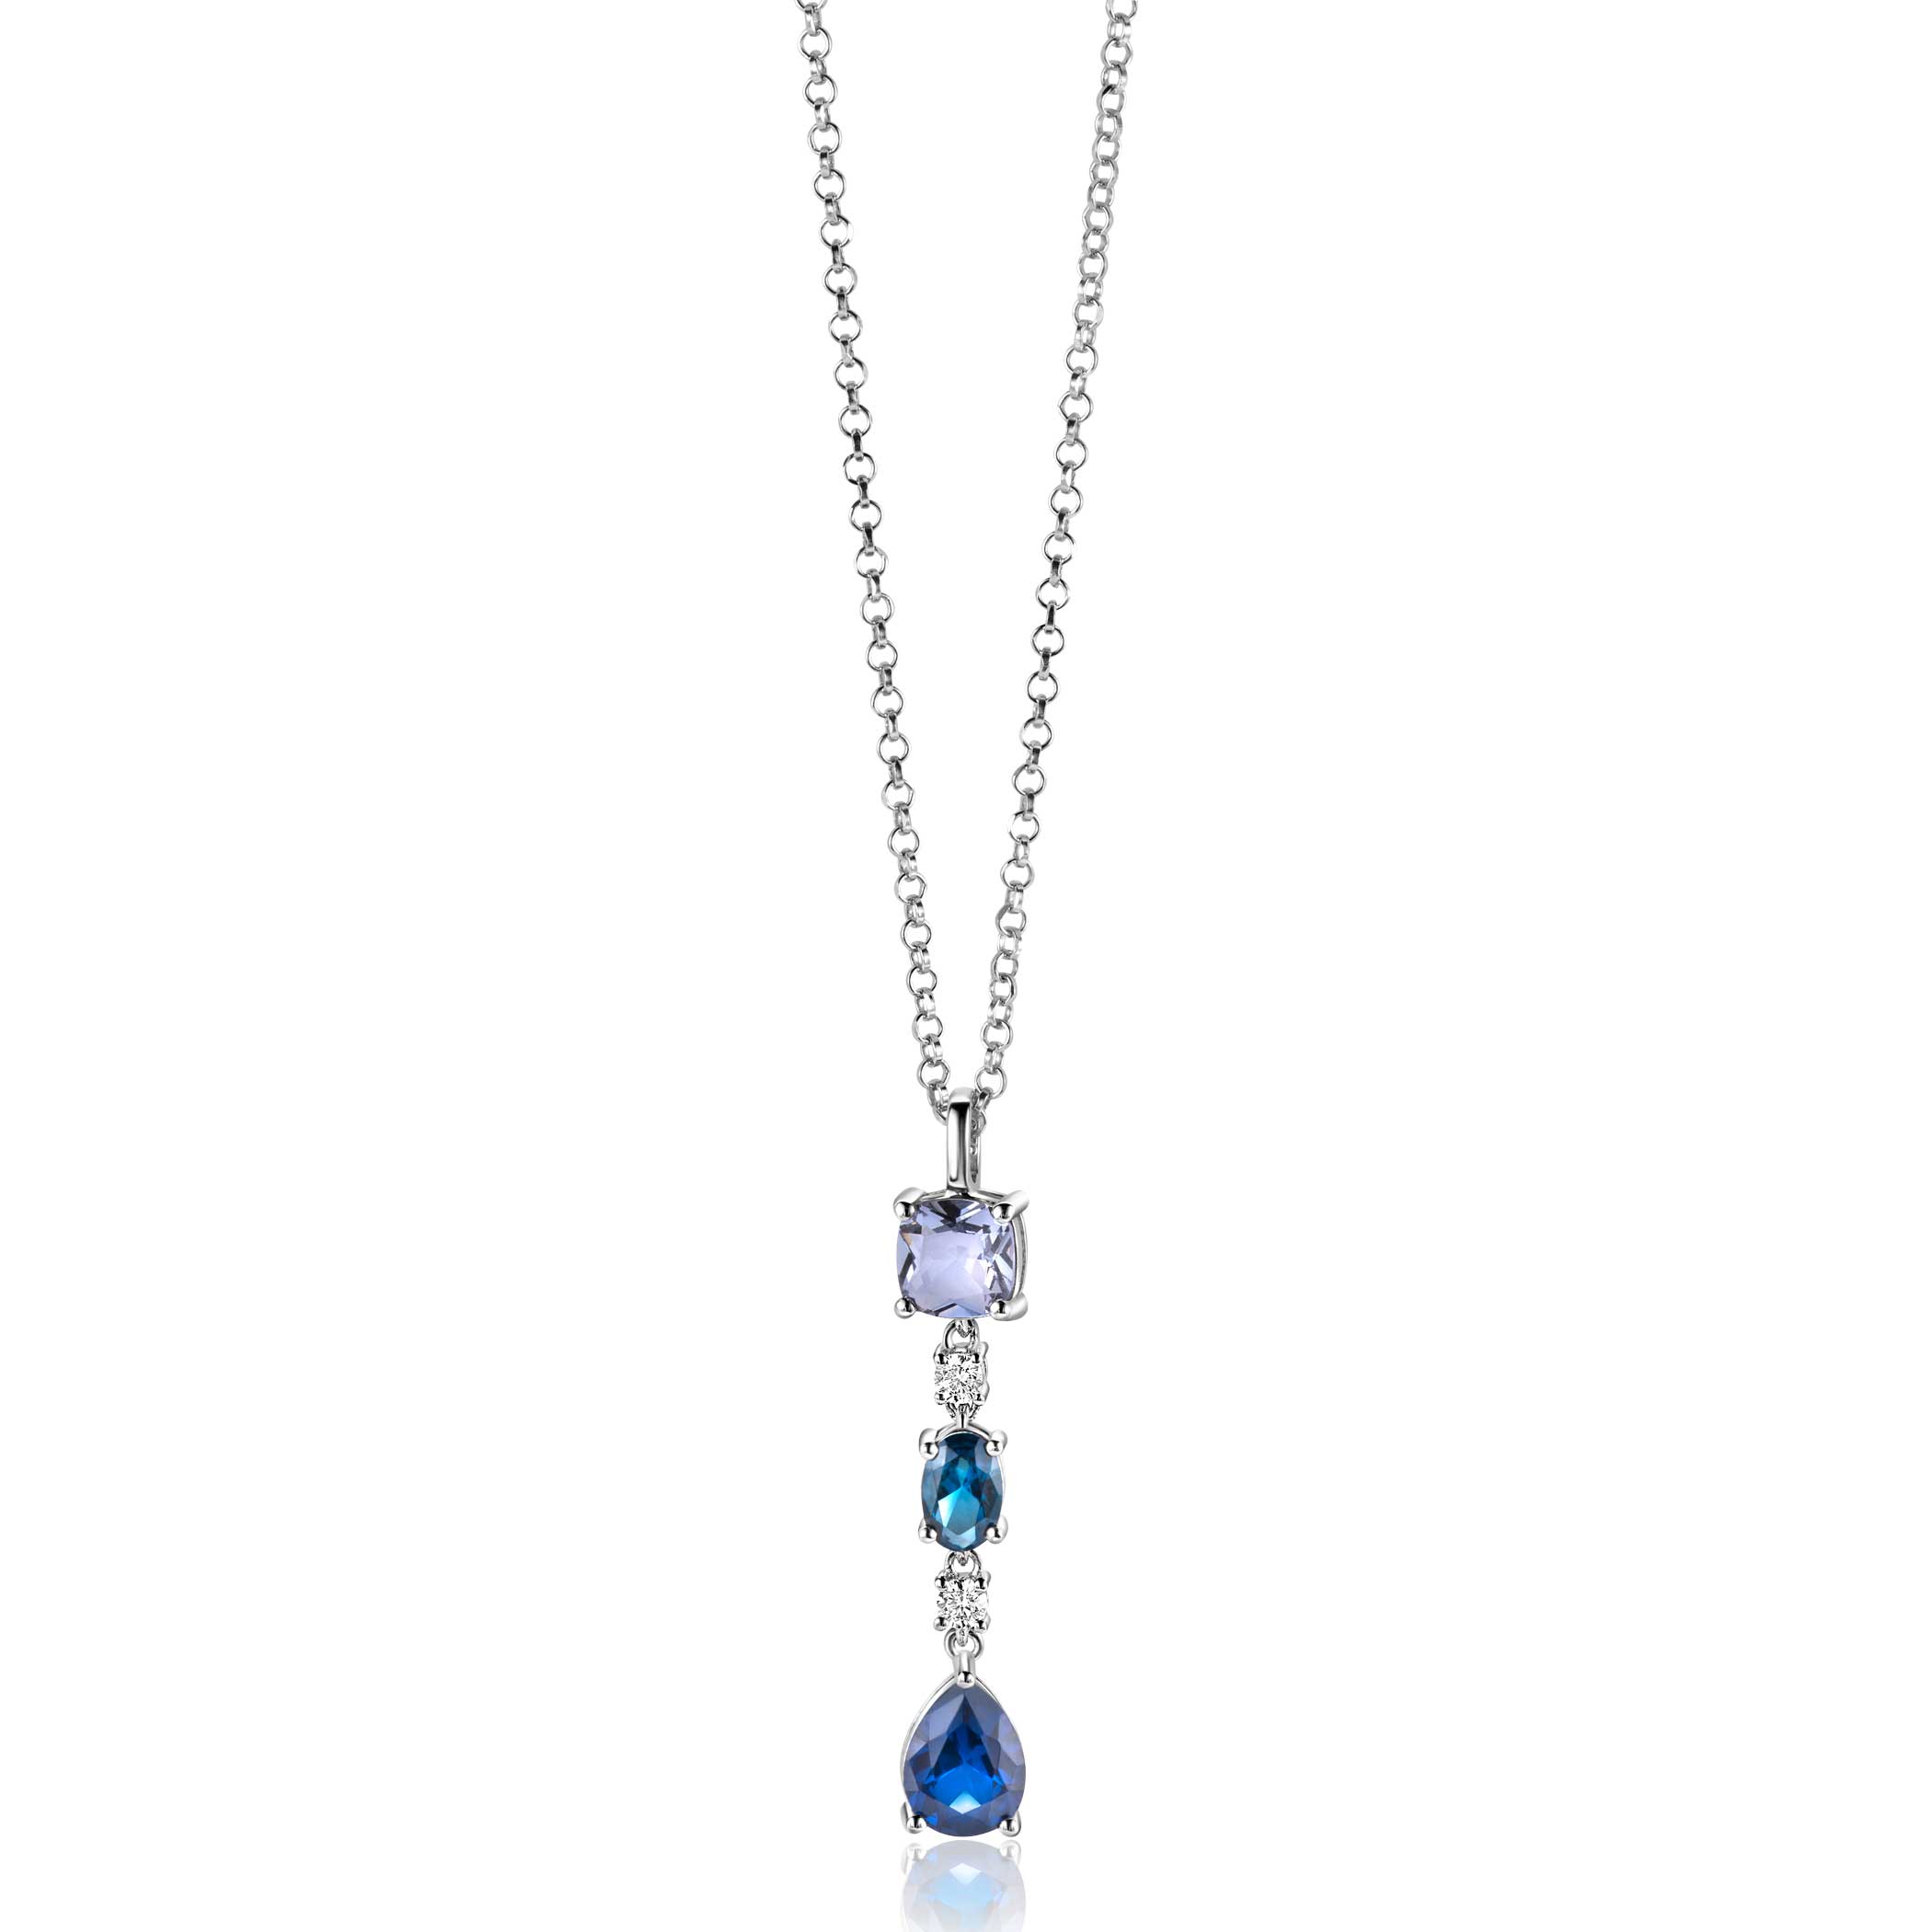 35mm ZINZI Sterling Silver Pendant Square, Oval and Drop Blue Color Stones with Small White Zirconias ZIH2397 (excl. necklace)